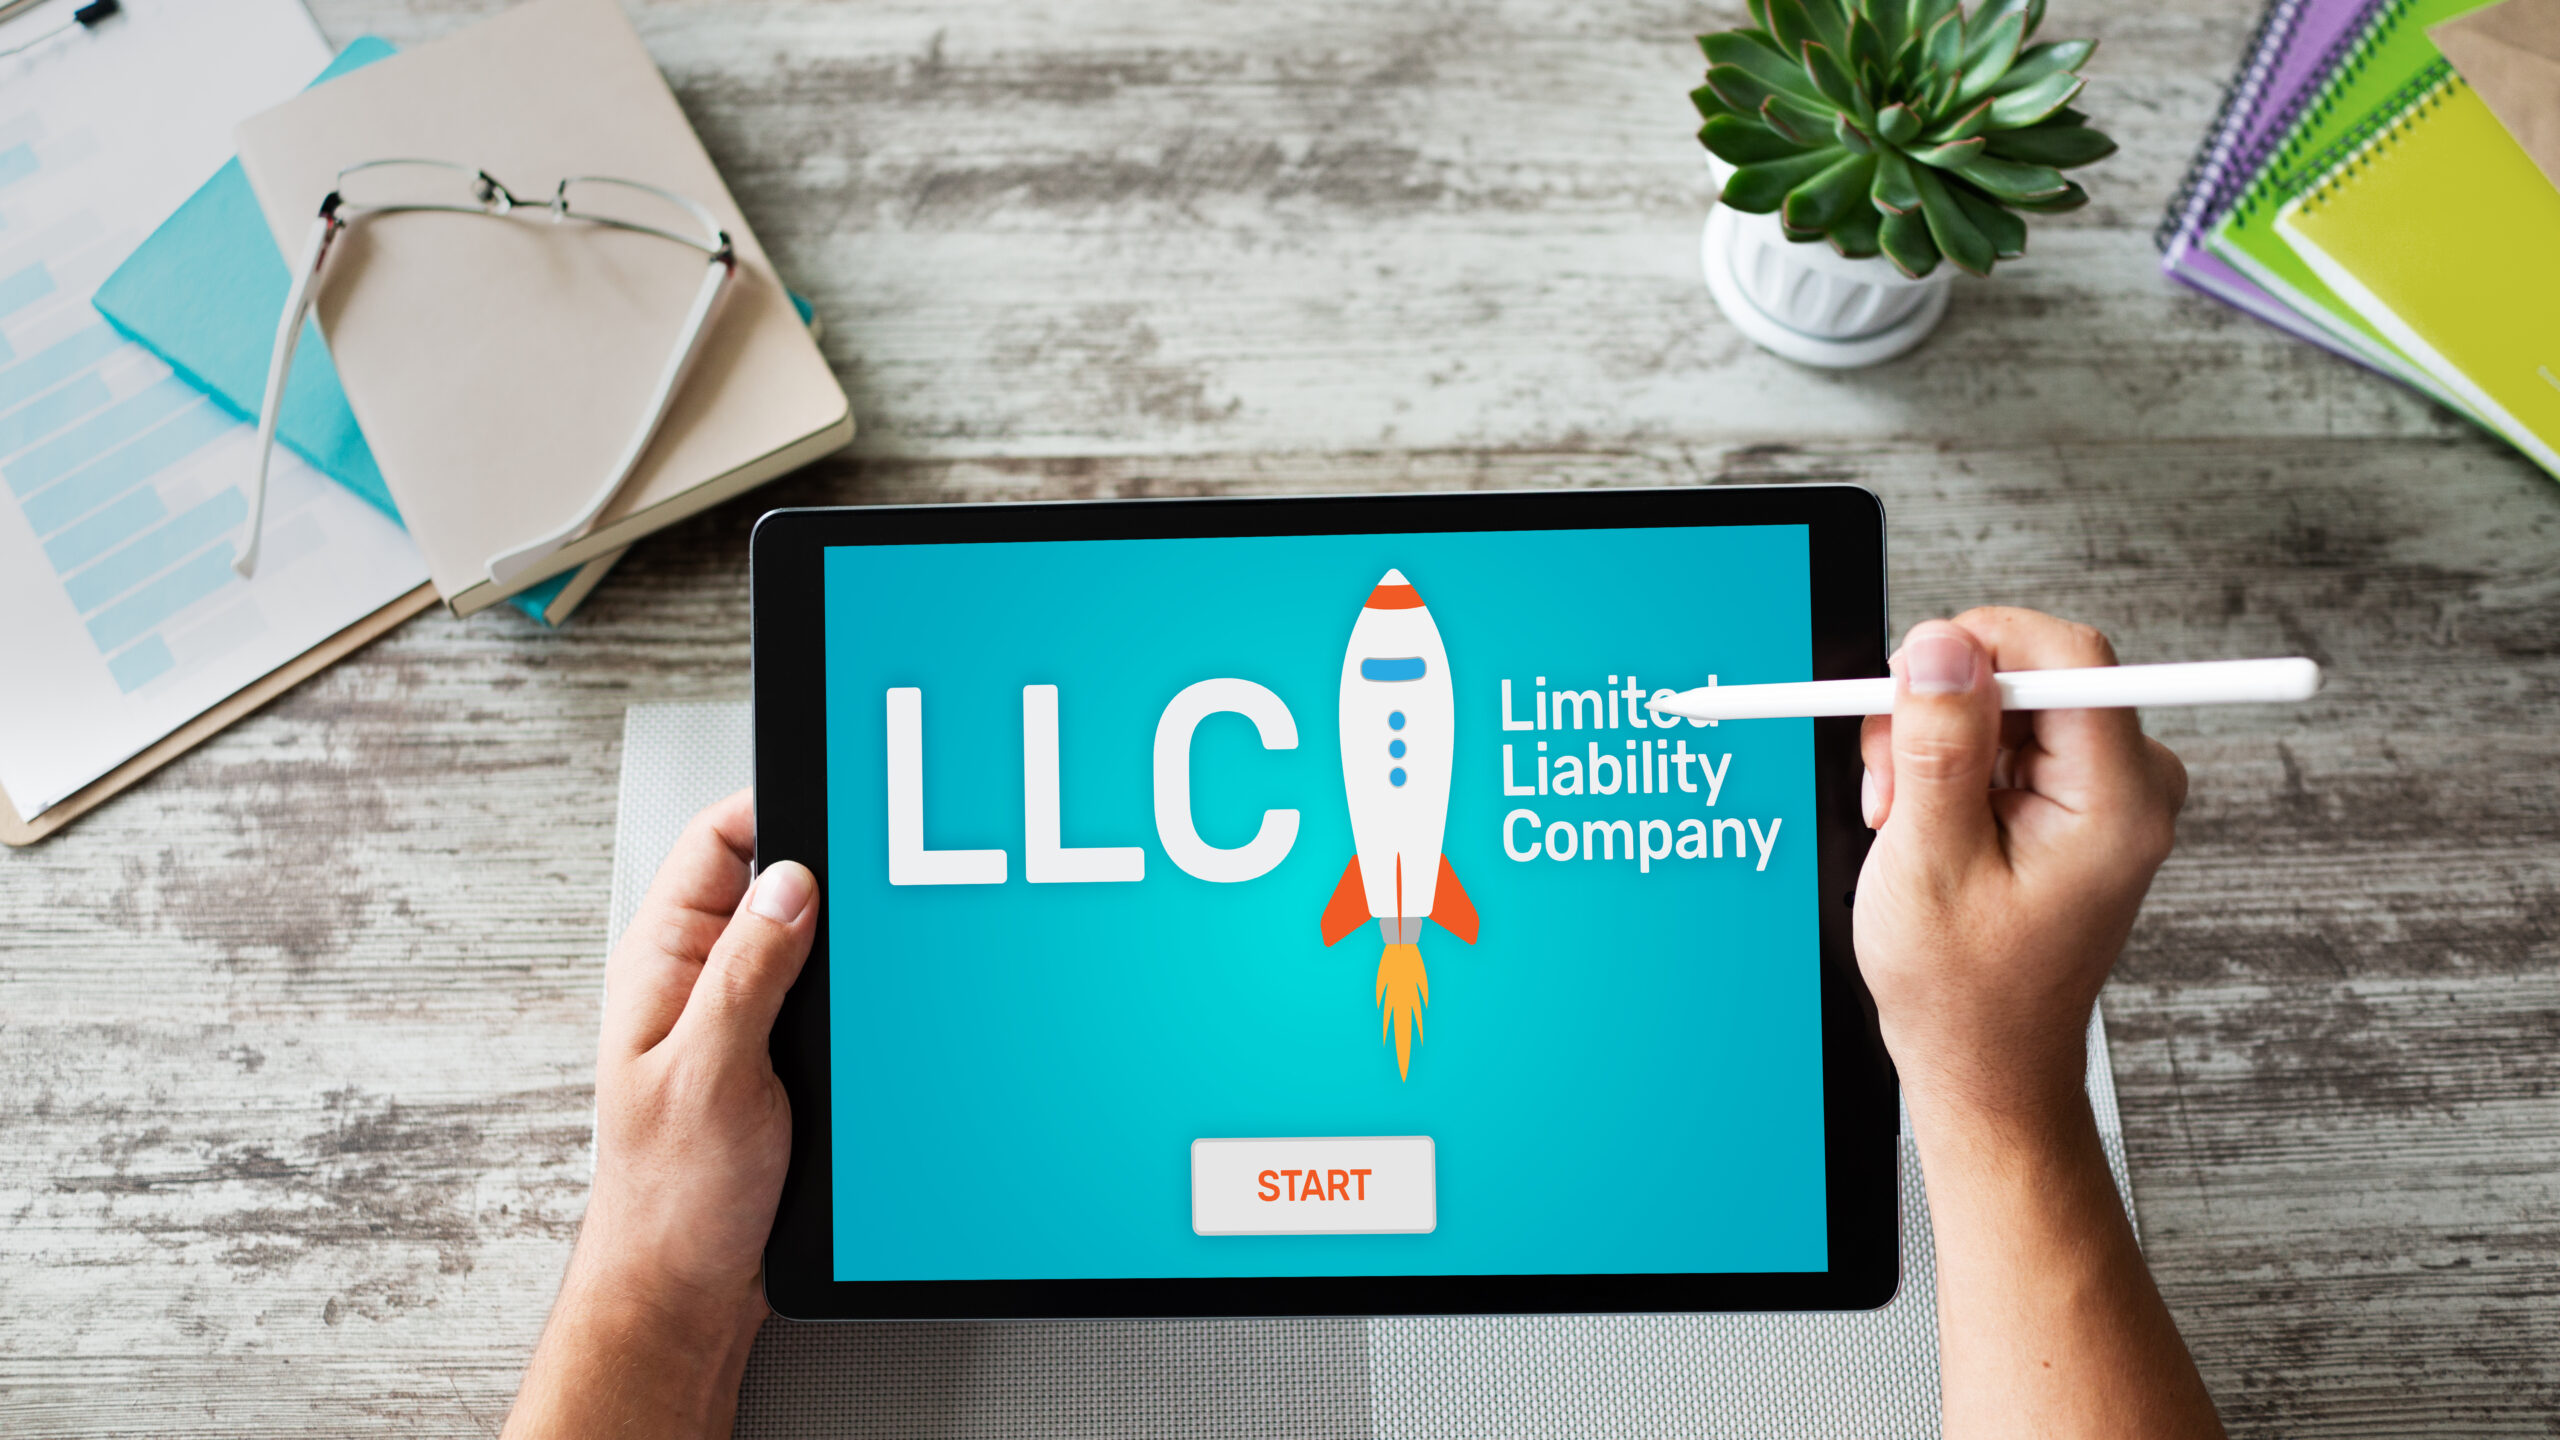 Overhead view of business professional holding a tablet that says ‘LLC - Limited Liability Company’